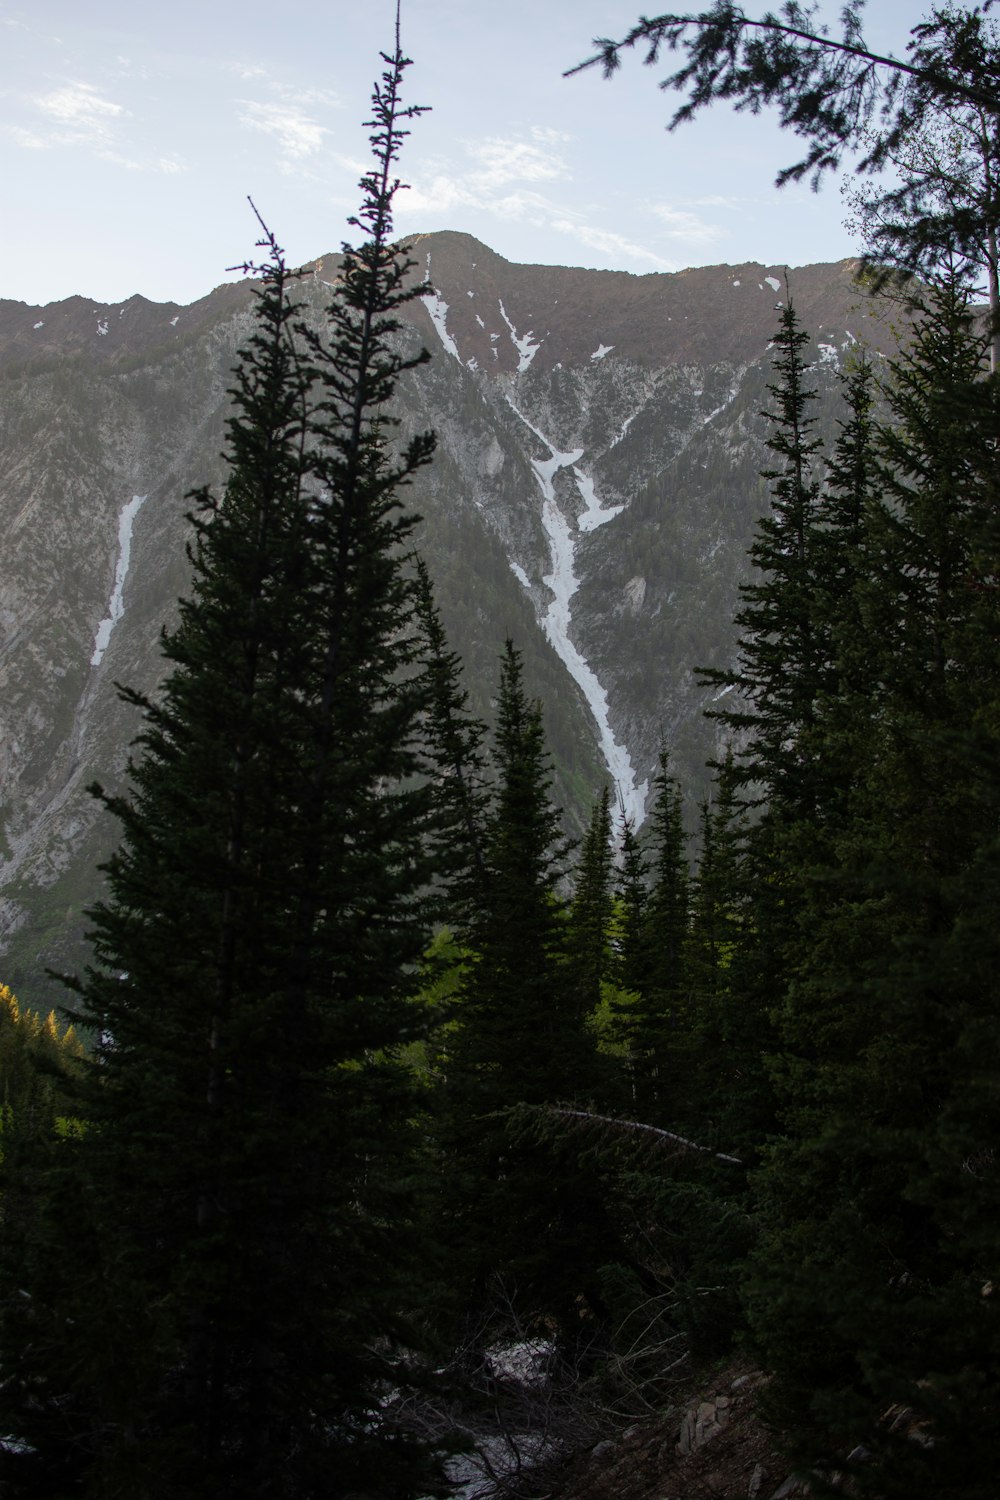 a group of pine trees in front of a mountain